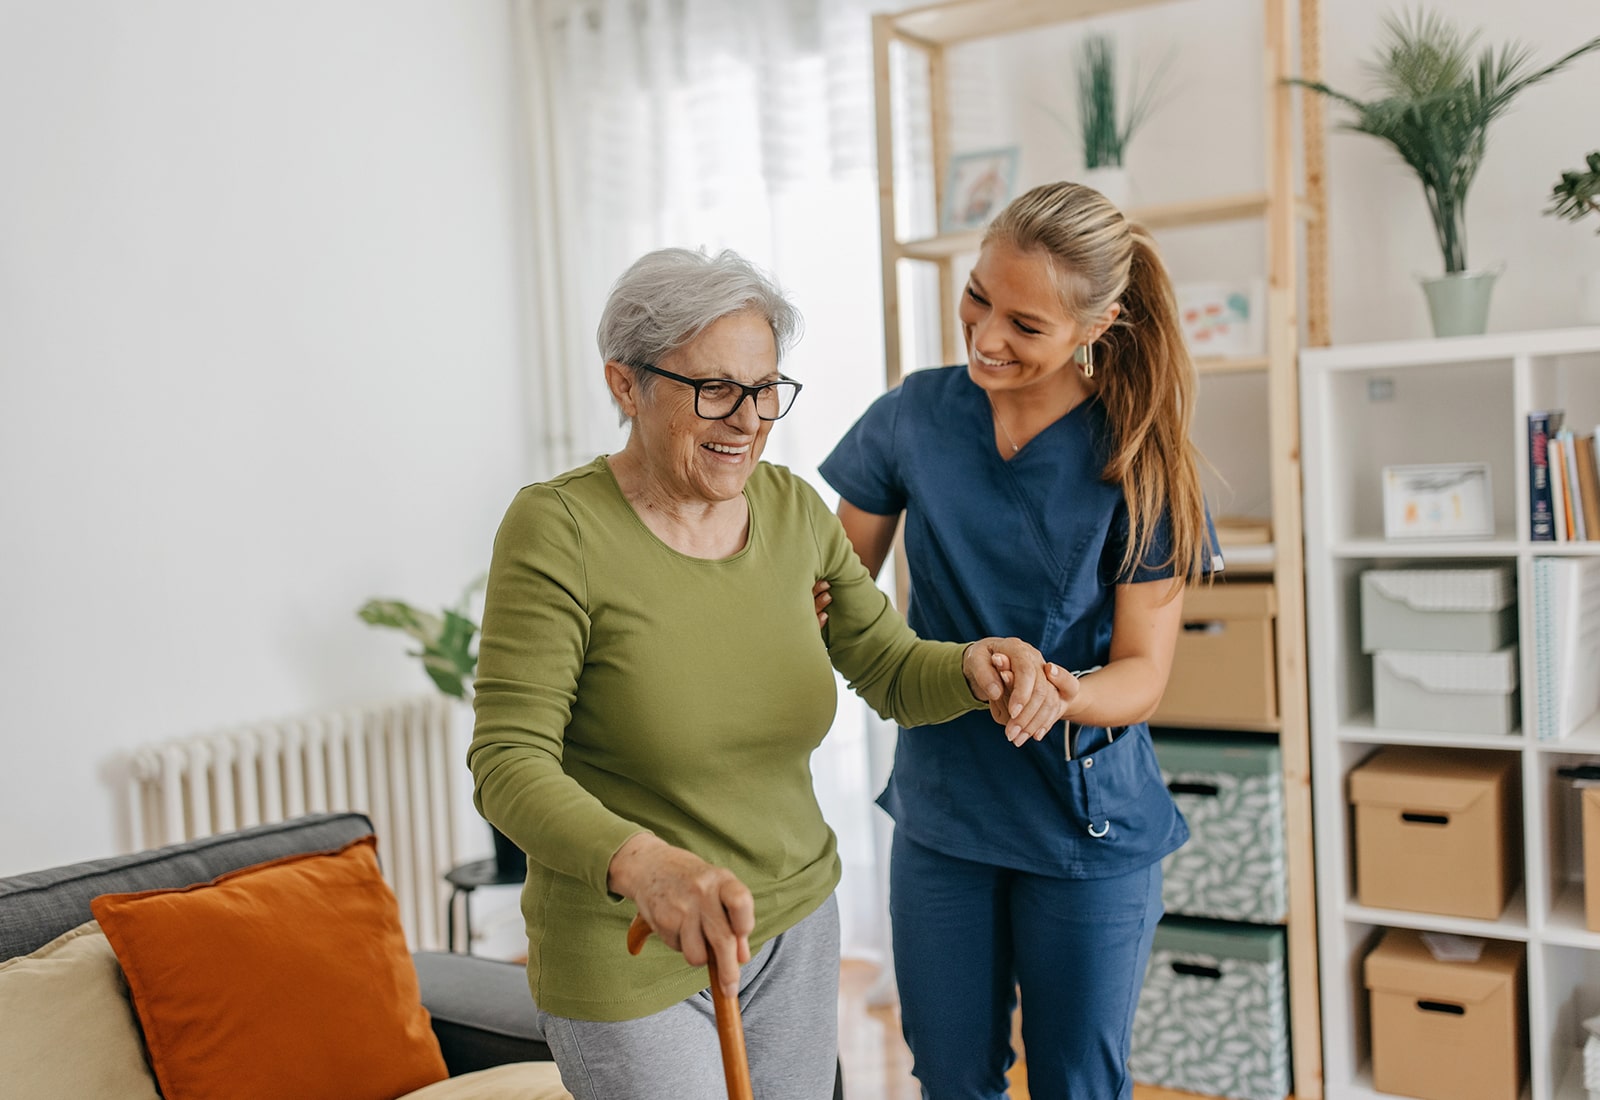 How To Start A Senior Home Safety Business